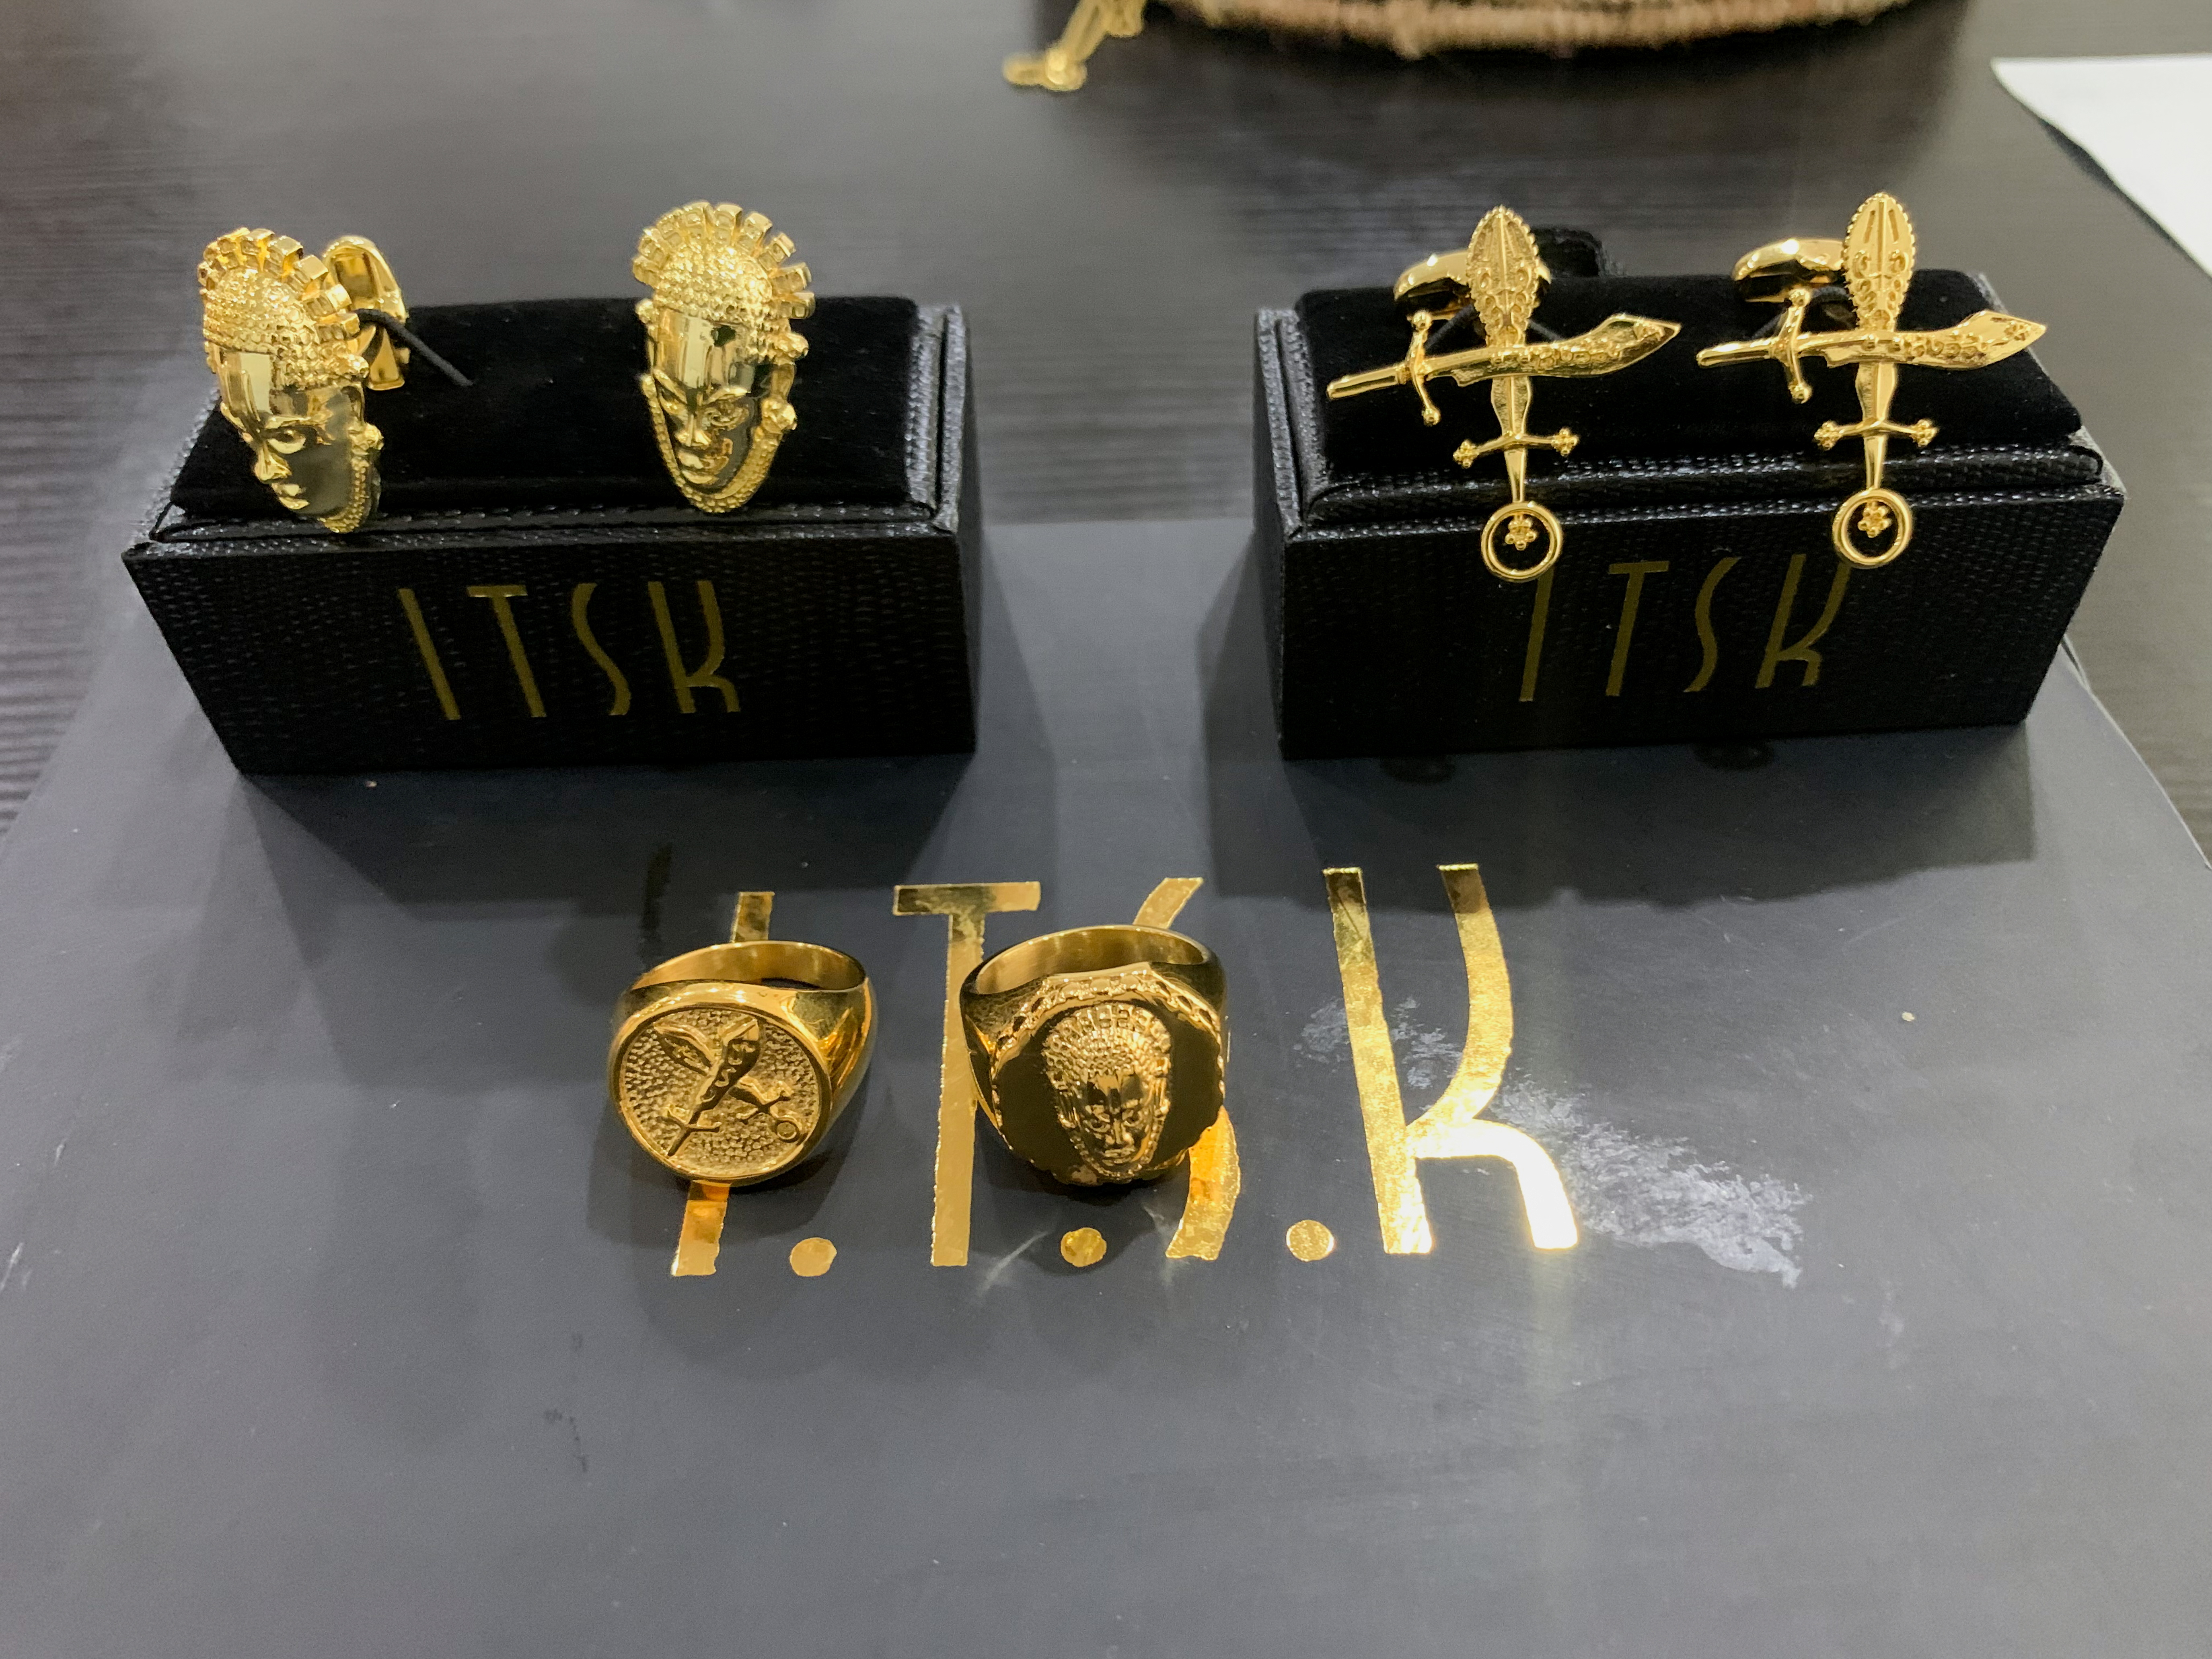 Gold-finished Nigerian fashion accessories inspired from cultural symbols are seen on display at the ITSK Gold office, in Lagos